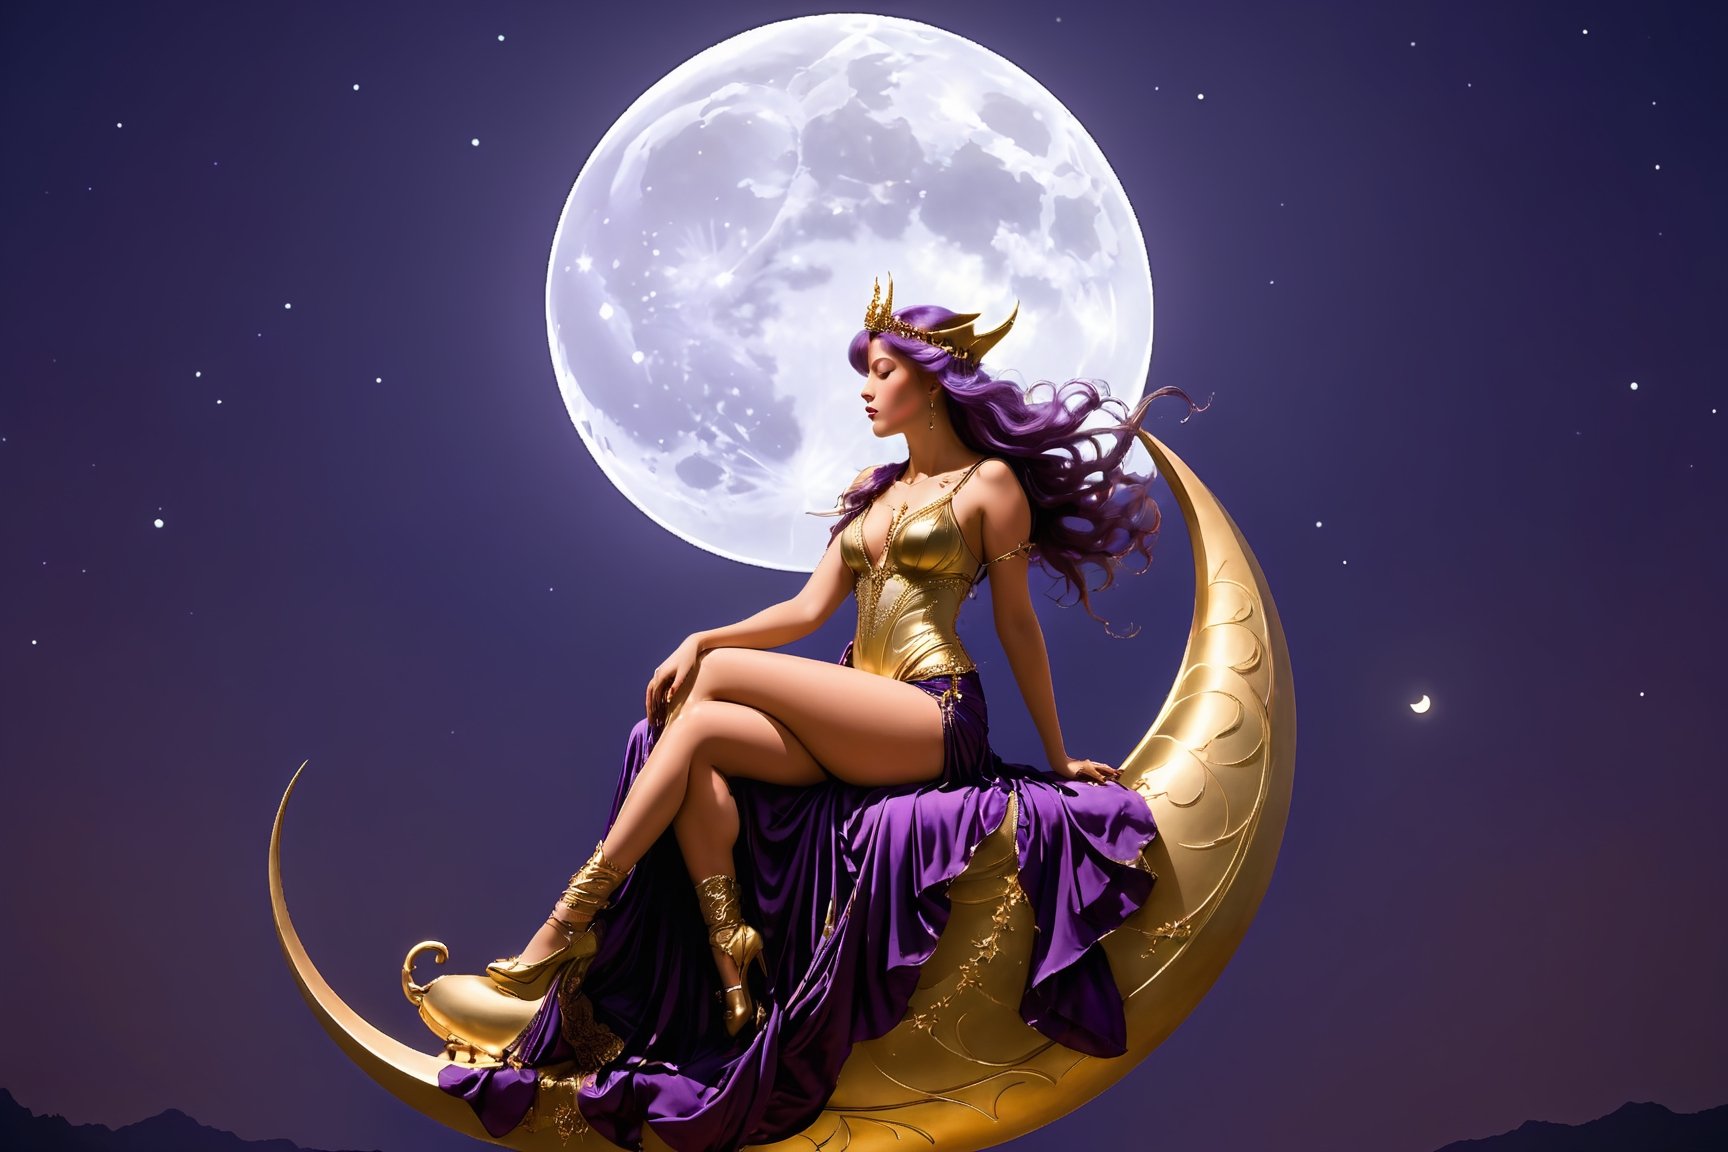 side view. full body shot, extreme long shot,  michael parkes style, pre-raphaelite, a beautiful young magical witch woman with long purple hair is sitting on a shiny golden crescent moon in the night sky. she is wearing an elaborate purple silk gown with intricate gold embroidery patterns. a gargoyle is sitting on the top of the moon gaurding the moon and woman. stars are in the sky. glowing obs of various sizes are floating in the sky,  michael parkes, artist study hands. ,1girl,Masterpiece